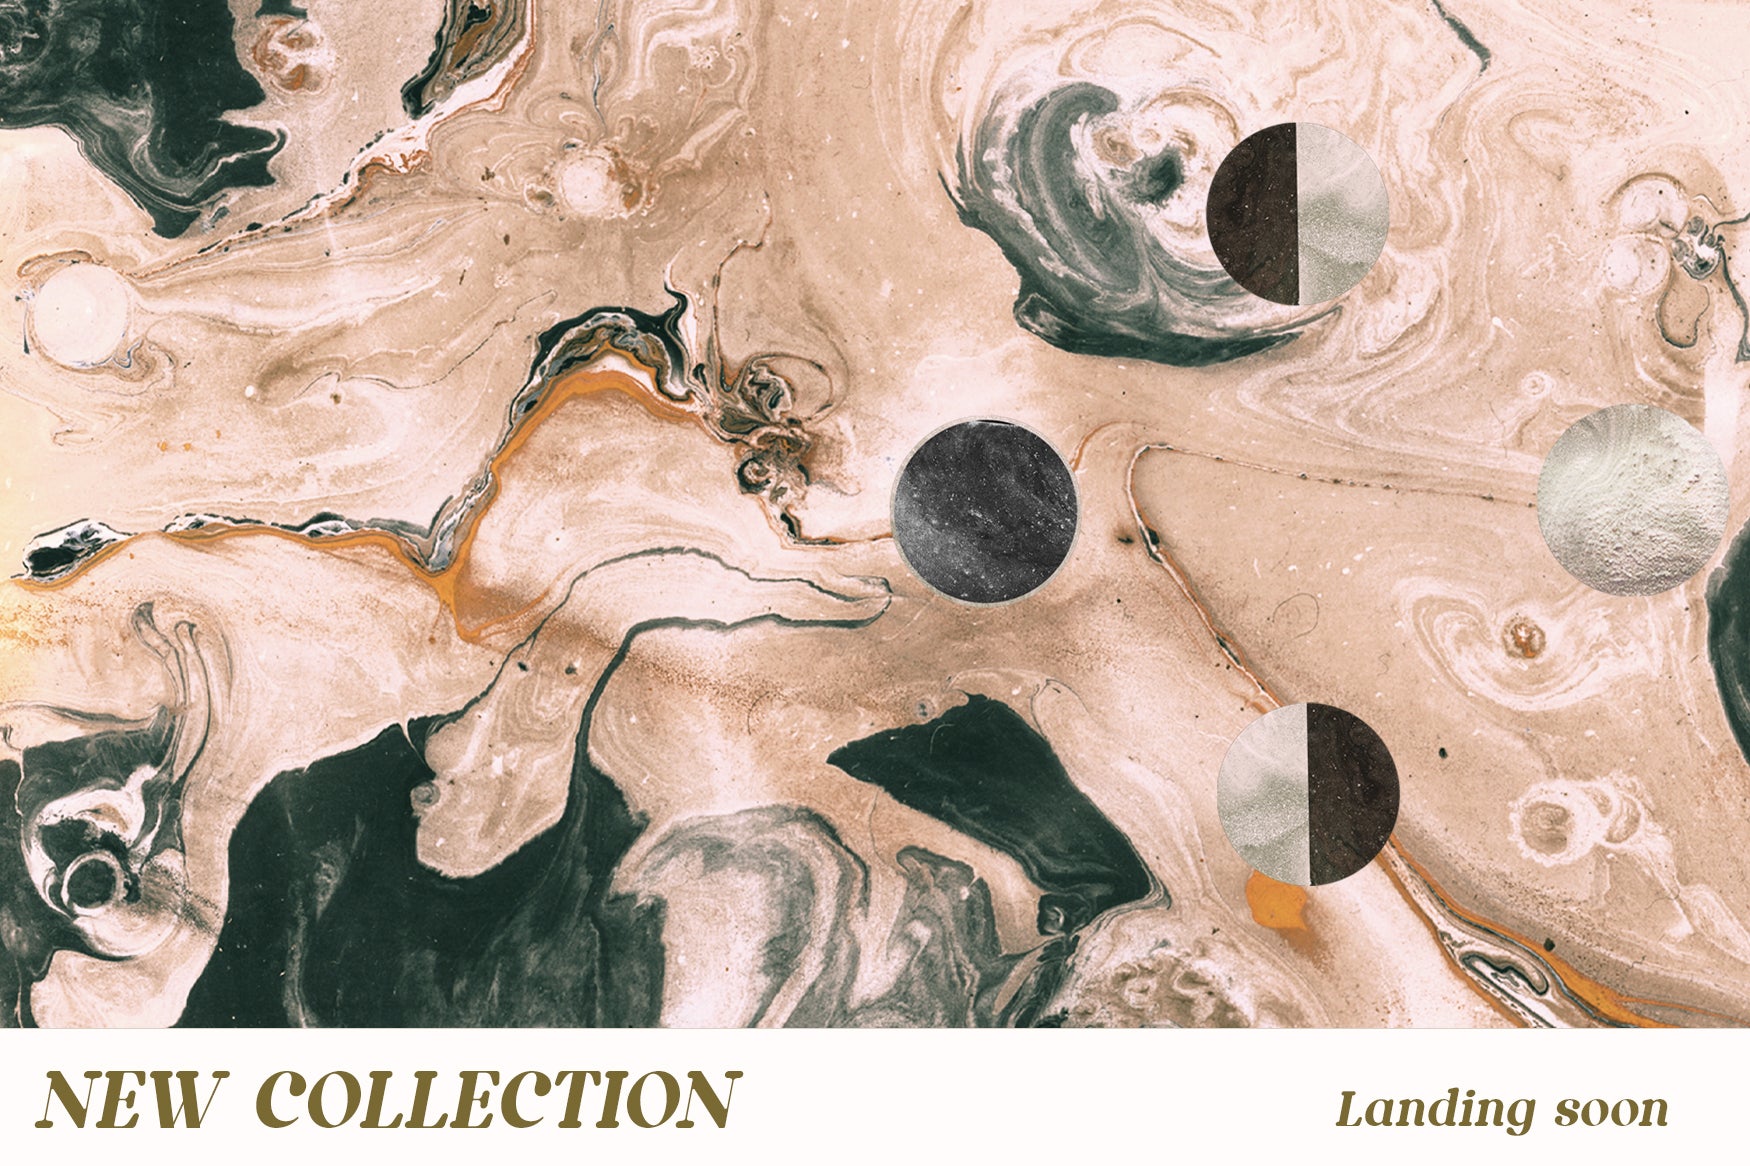 Marble texture with moons. New collection coming soon